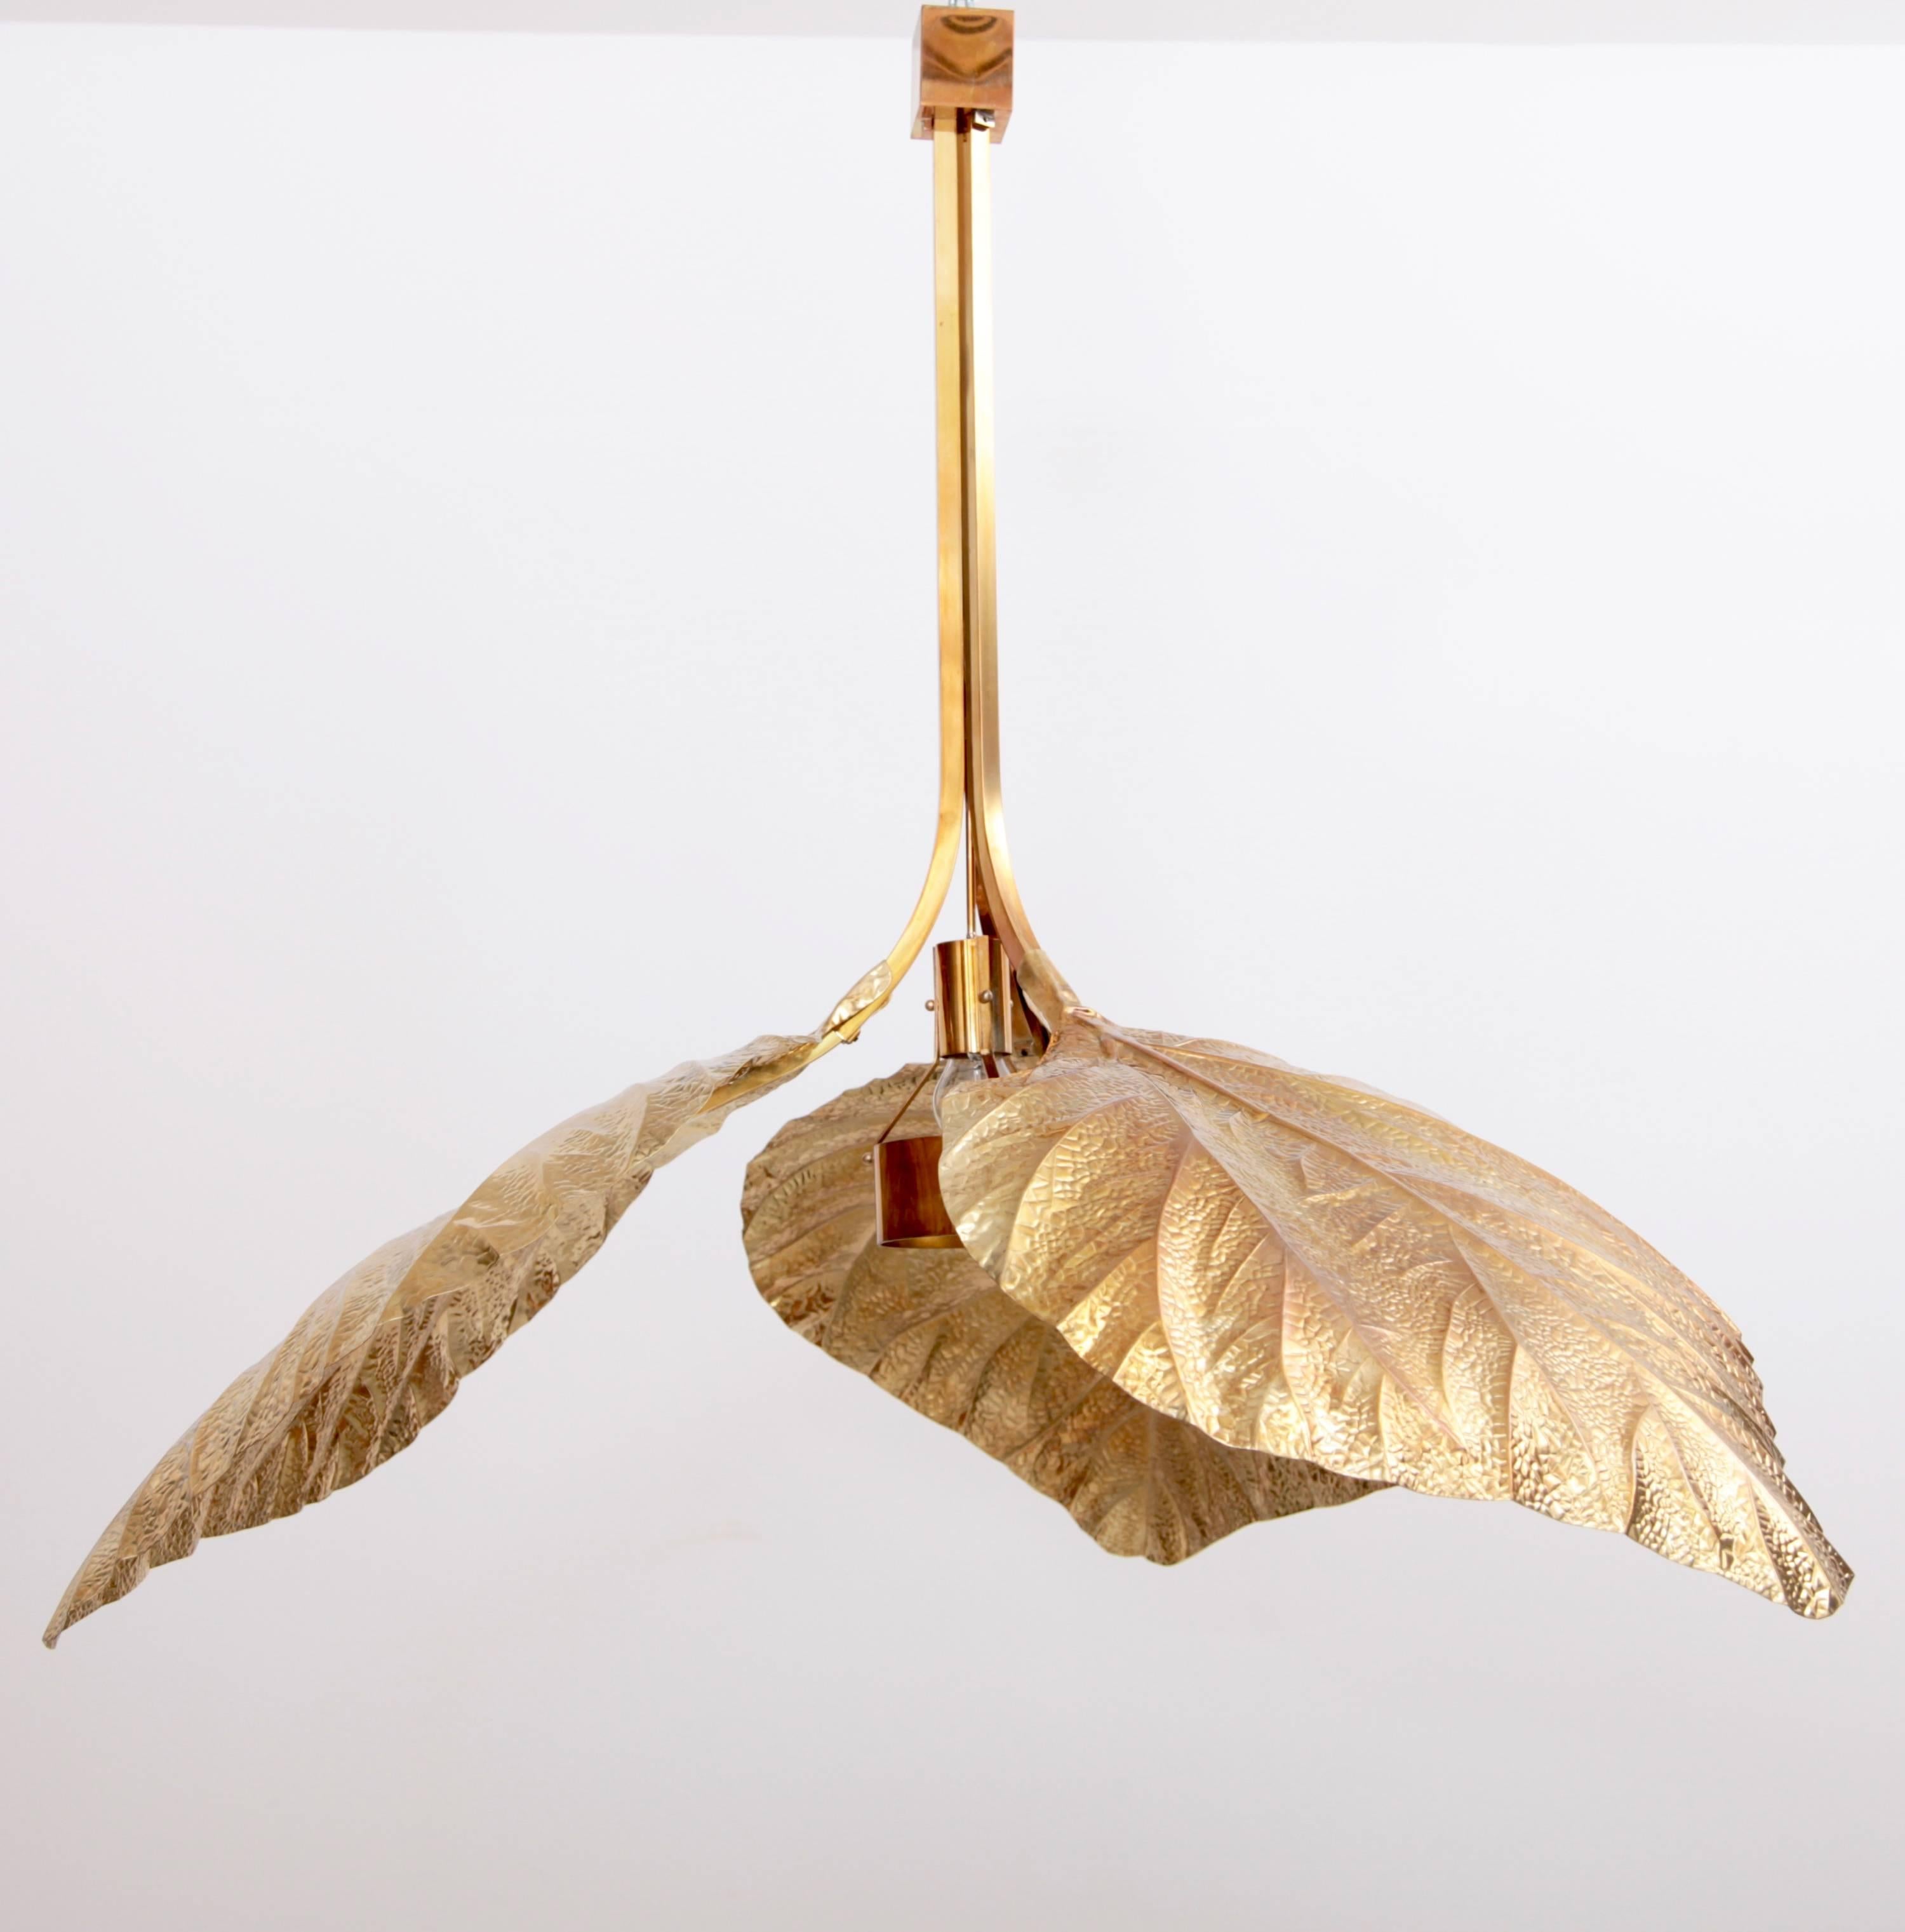 Rare huge rhubarb leaf chandelier by the Italian designer Tommaso Barbi. The chandelier is made of brass and the reflexion of the light on the brass brings a cozy atmosphere in every room. The chandelier is very hard to find and a real collectors